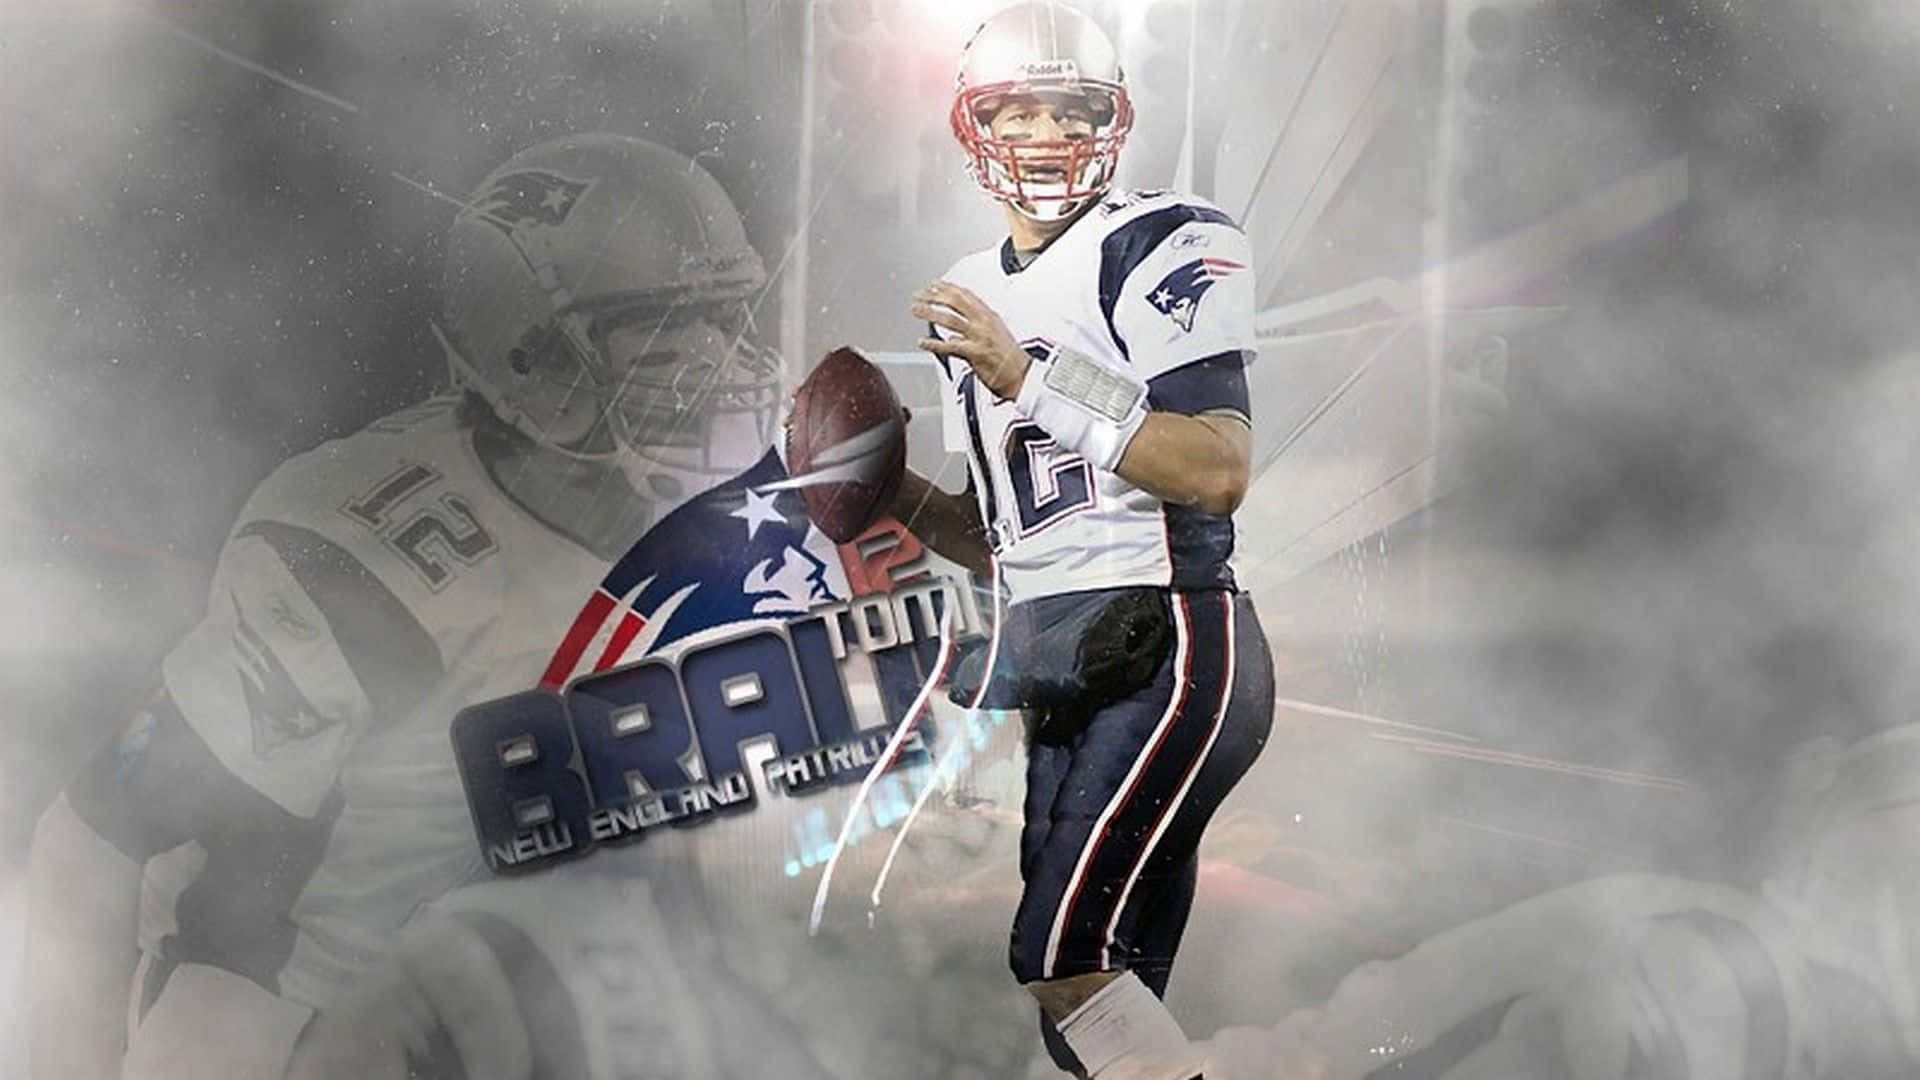 Go Pats! Background